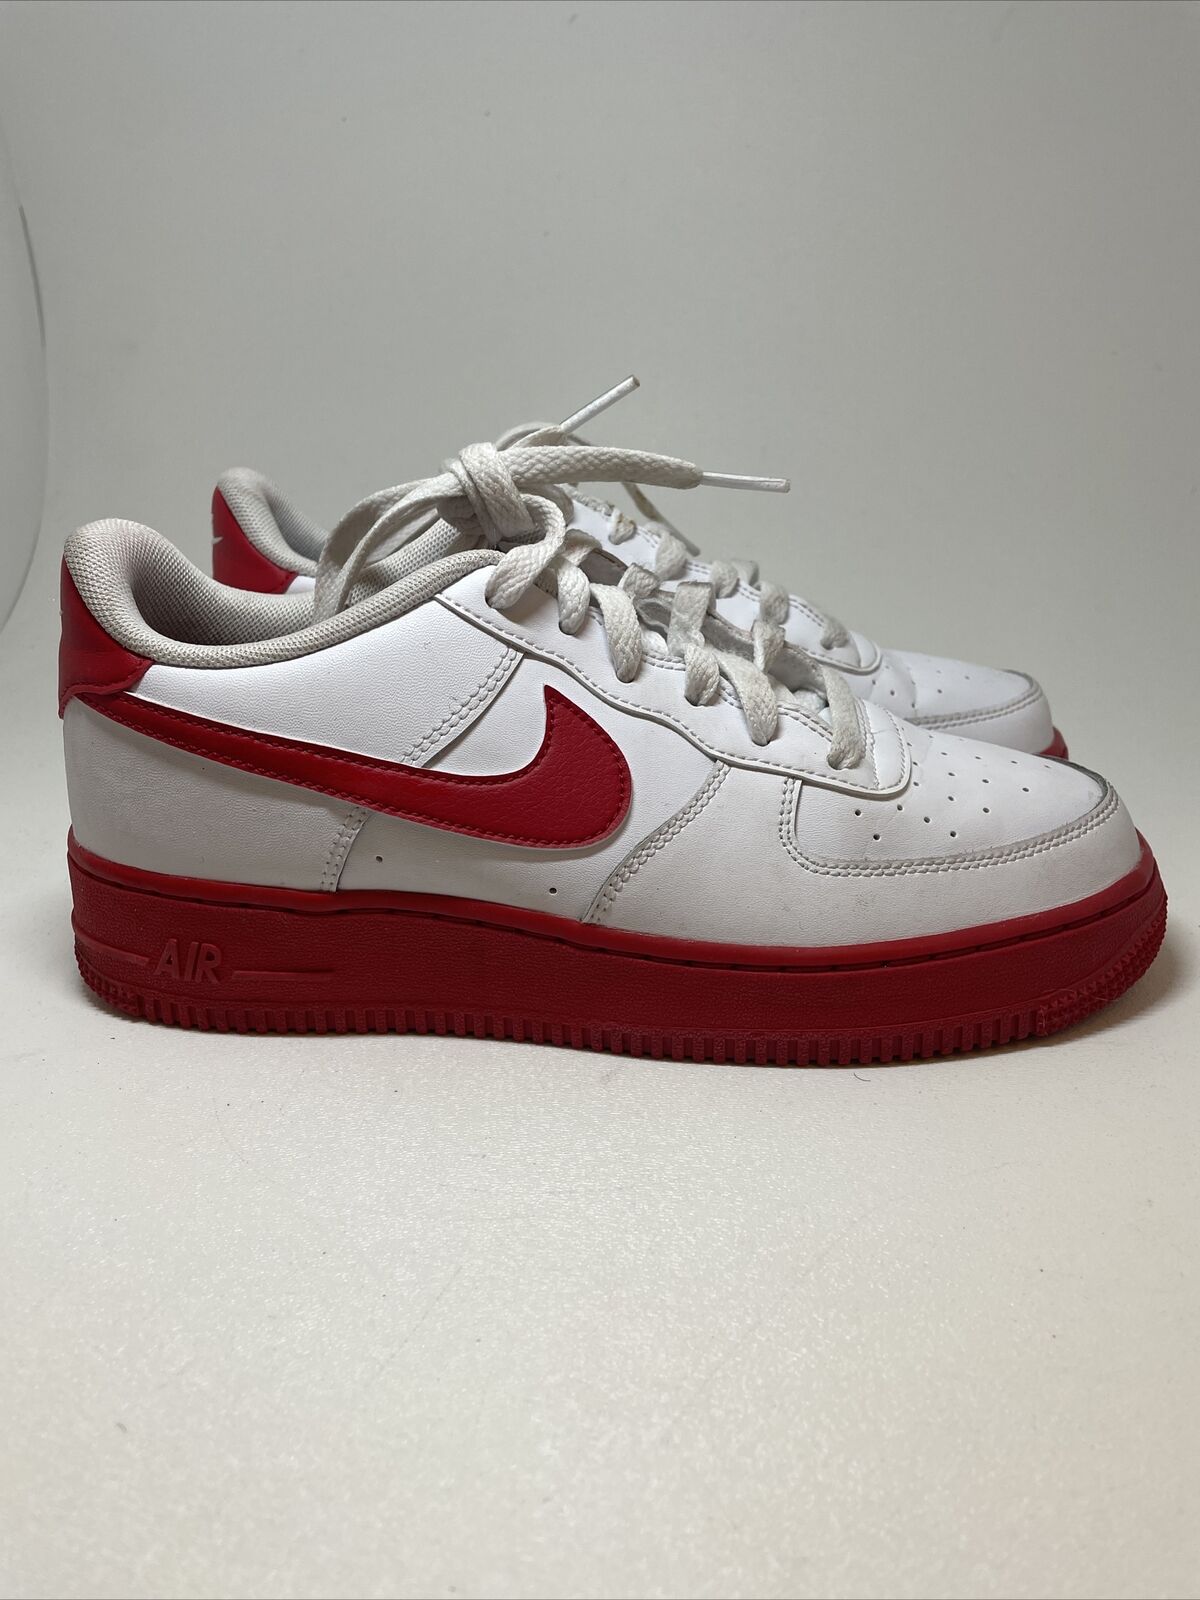 Nike Air Force 1 Low White Red Sole GS Size 7y Leather Sneaker 